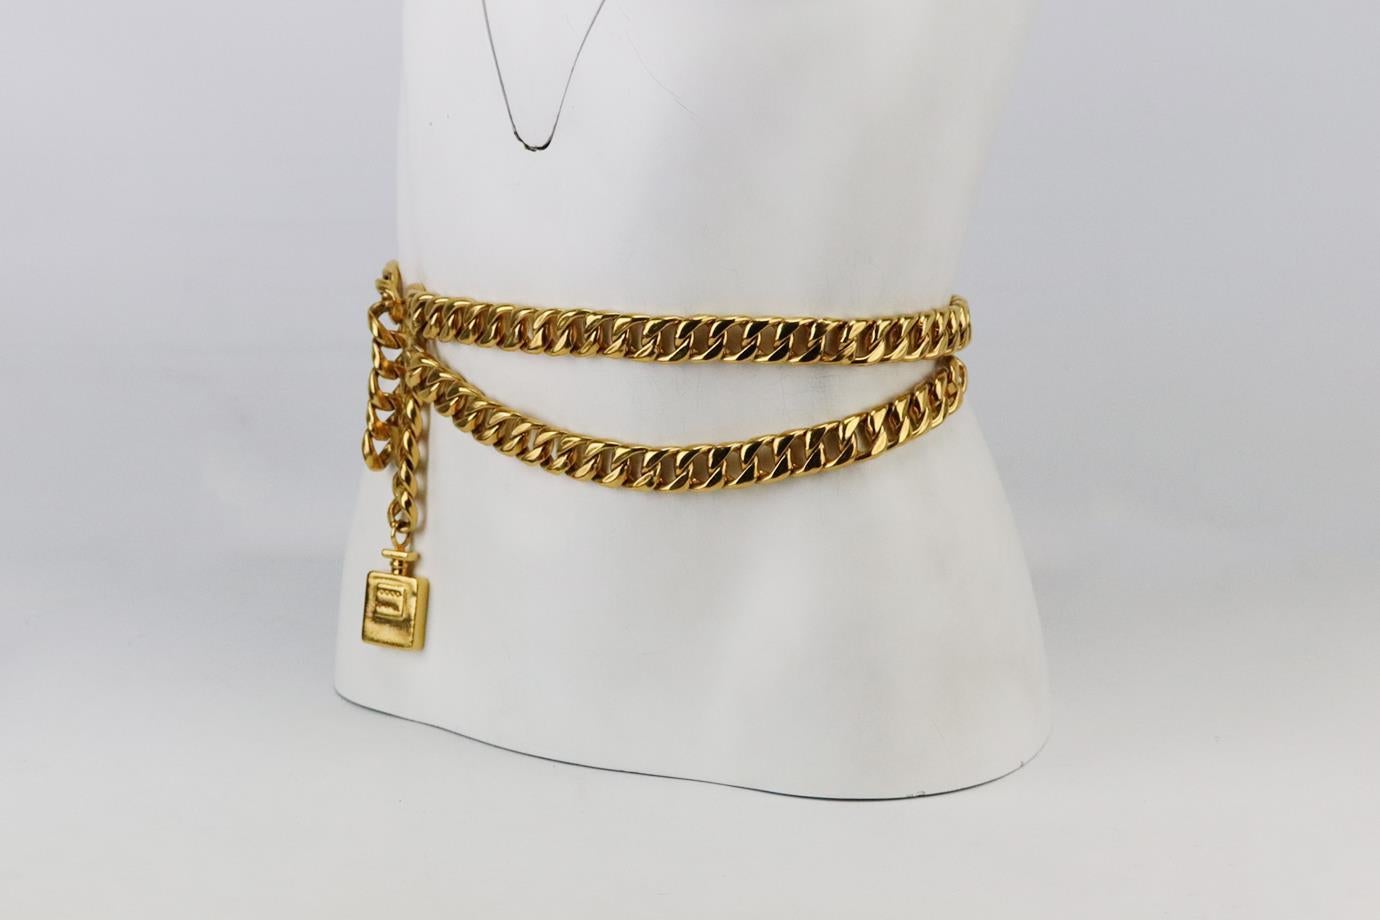 Chanel Vintage Coco Chanel perfume bottle chain waist belt. Made from large gold-tone chain with Coco Chanel perfume bottle pendant. Gold. Hook fastening at front. Length: 30 in. Width: 0.7 in